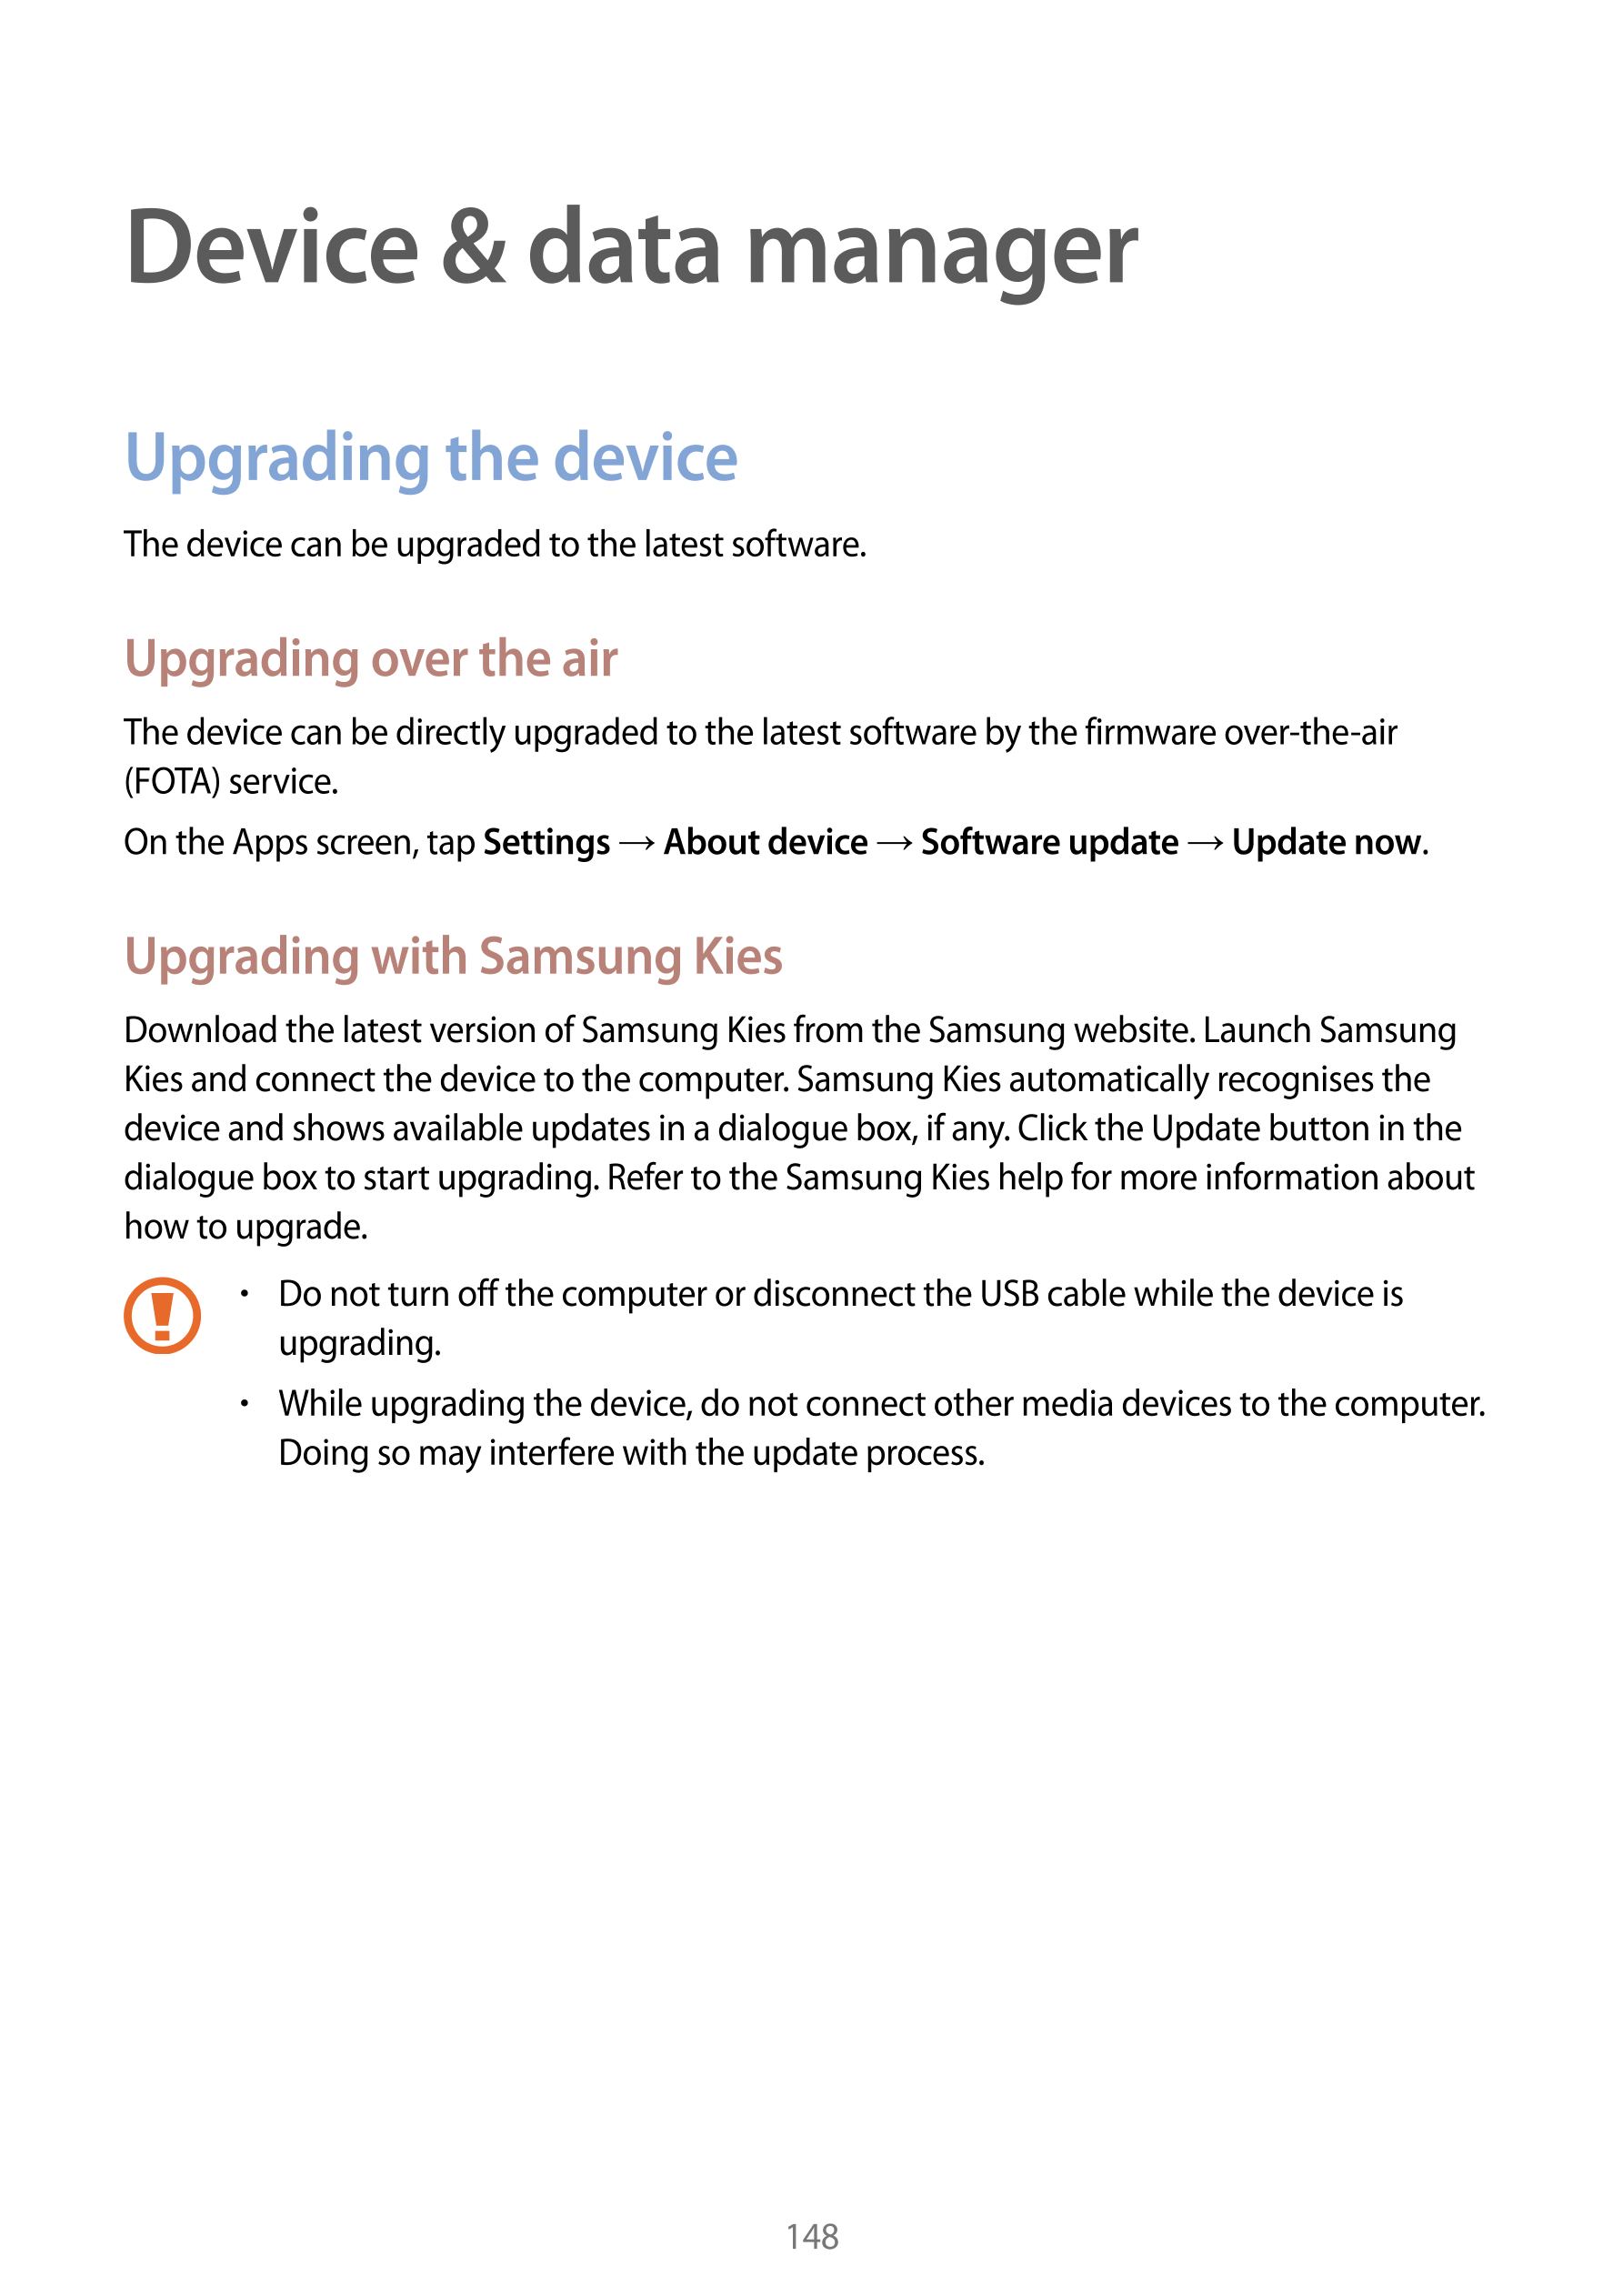 Device & data manager
Upgrading the device
The device can be upgraded to the latest software.
Upgrading over the air
The device 